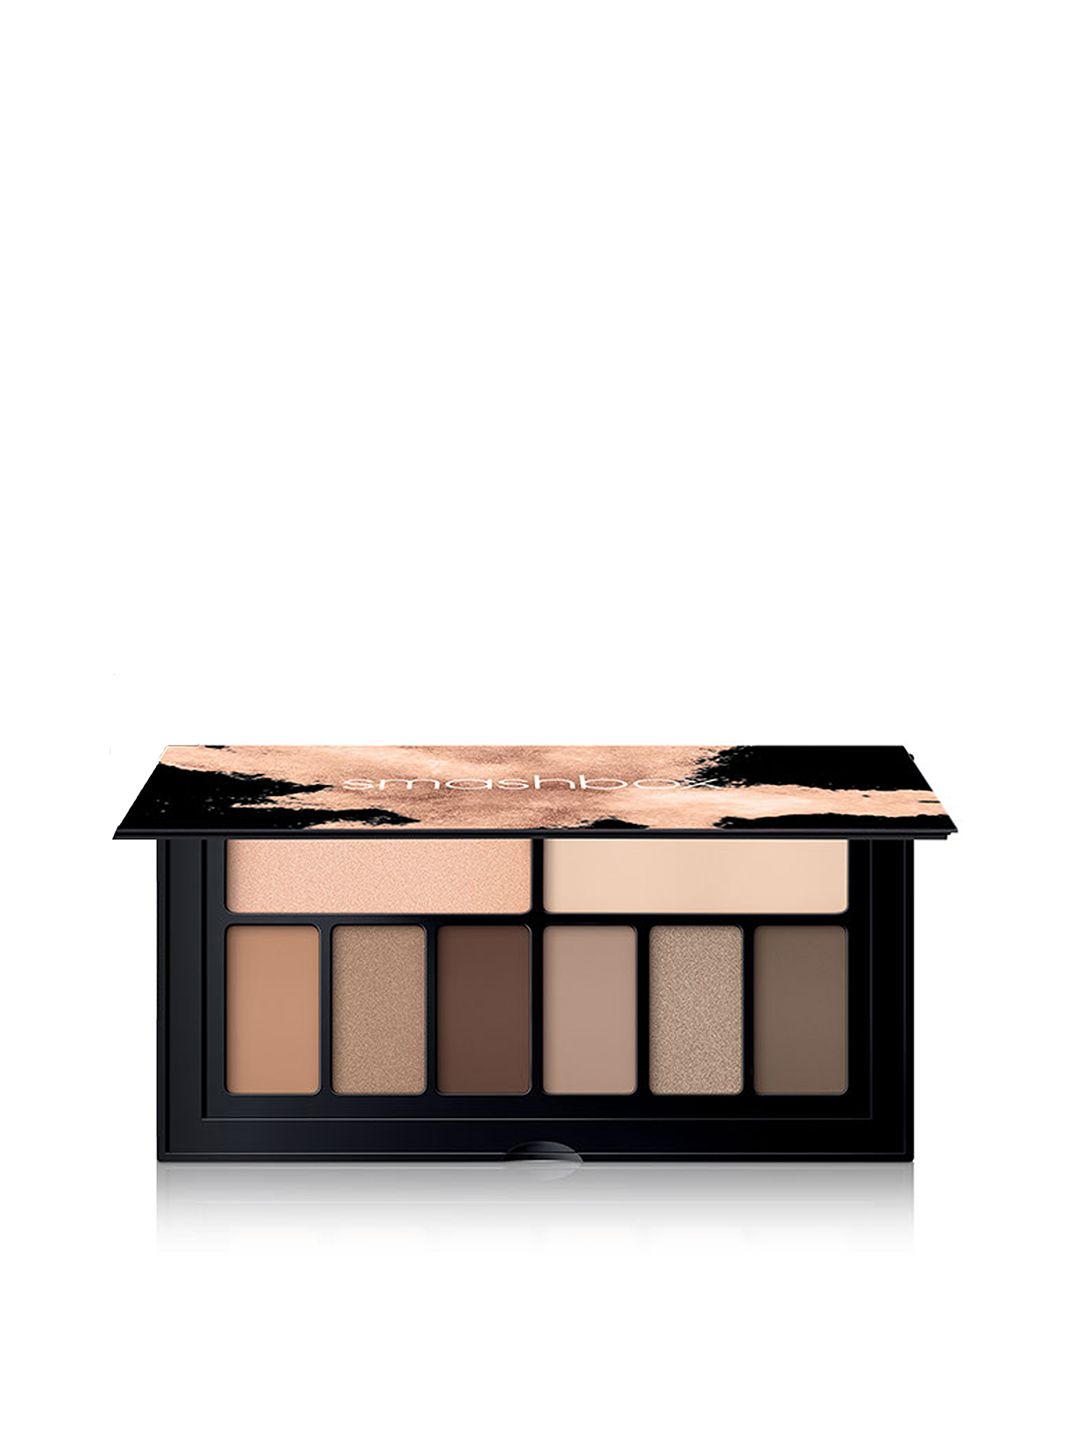 Smashbox Cover Shot Eye Shadow Palette Price in India